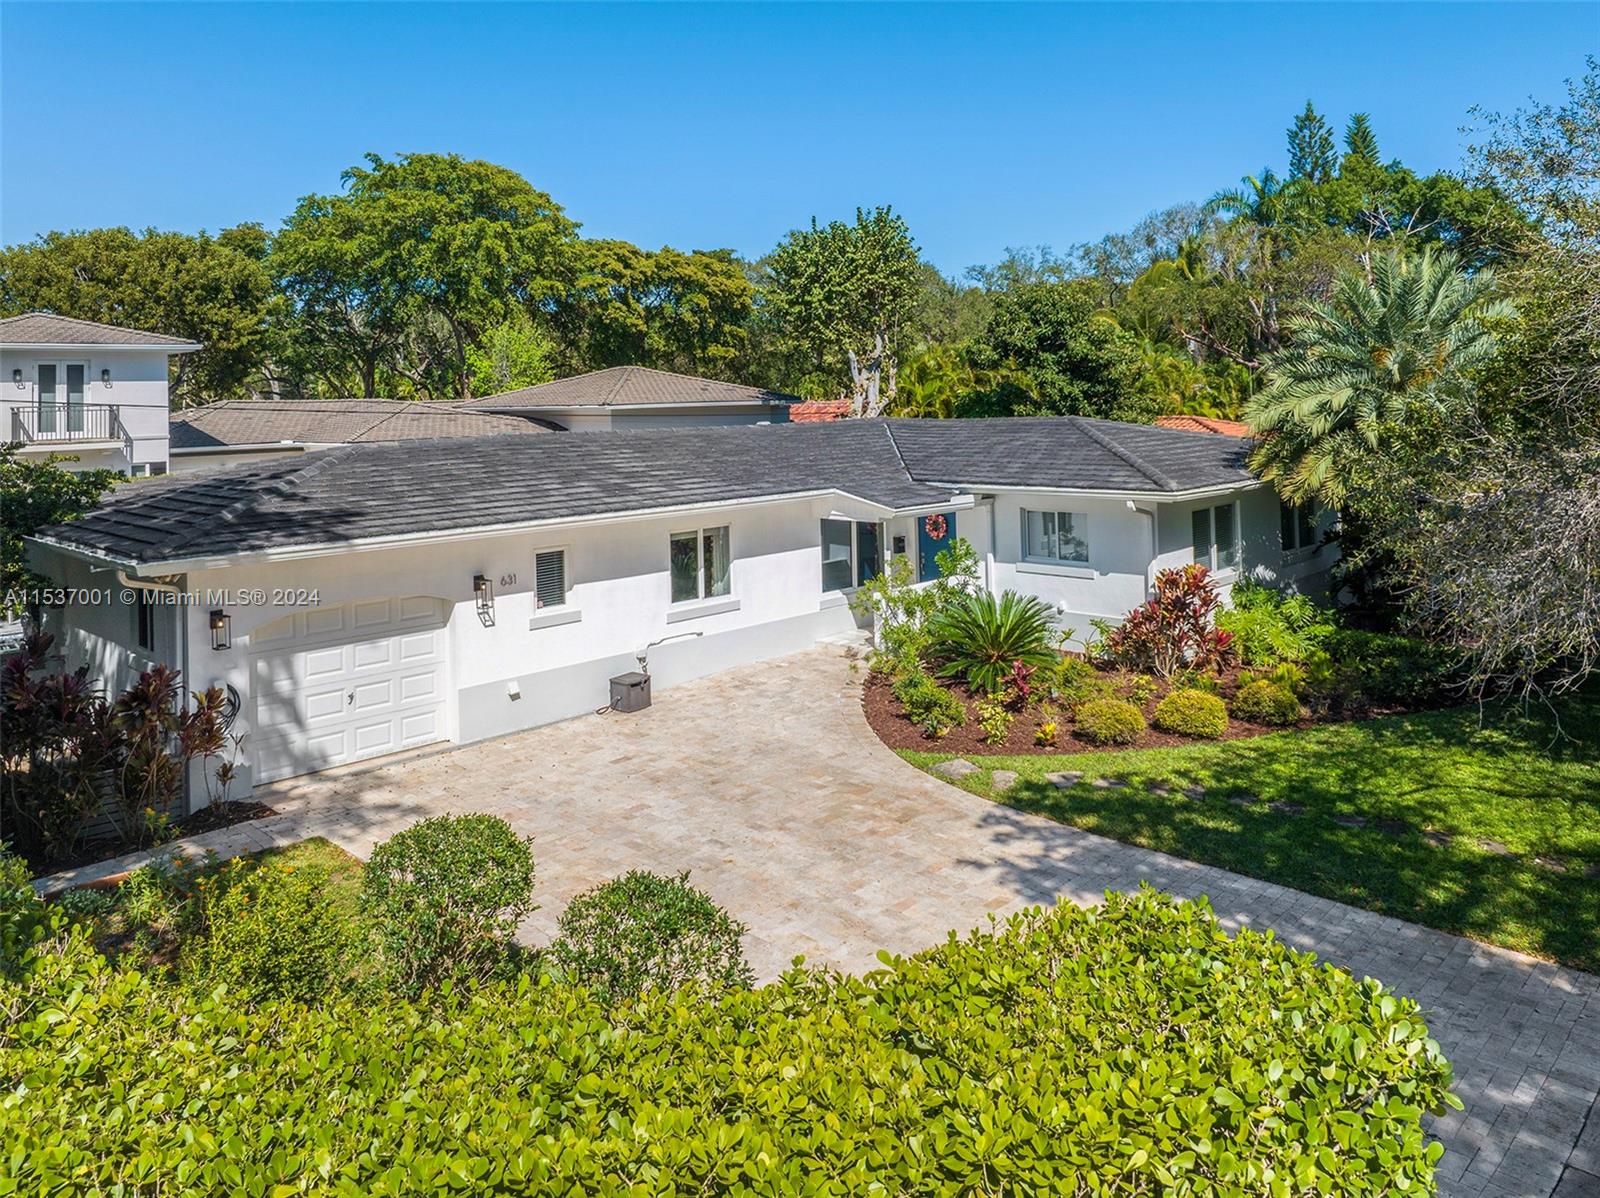 A true gem offered in the sought after Platinum Triangle neighborhood of south Coral Gables. This warm & inviting 4 bedroom, 2 1/2 bath residence sits on a spacious (11,008 SF) corner lot in a quaint tree lined street. Features include an open floor plan w/a multitude of windows that allow for an abundance of natural light throughout, a private bedroom corridor incorporating all four bedrooms, a family room overlooking the pool and backyard, state of the art summer kitchen ideal for entertaining, walled in yard w/artificial grass perfect for kids to enjoy & spacious driveway w/EV charging station. Ideally located w/in close proximity to a variety of excellent schools, Matheson Hammock, Coconut Grove, South Miami, Merrick Park & Miracle Mile. See attached floor plan SF larger than tax roll.